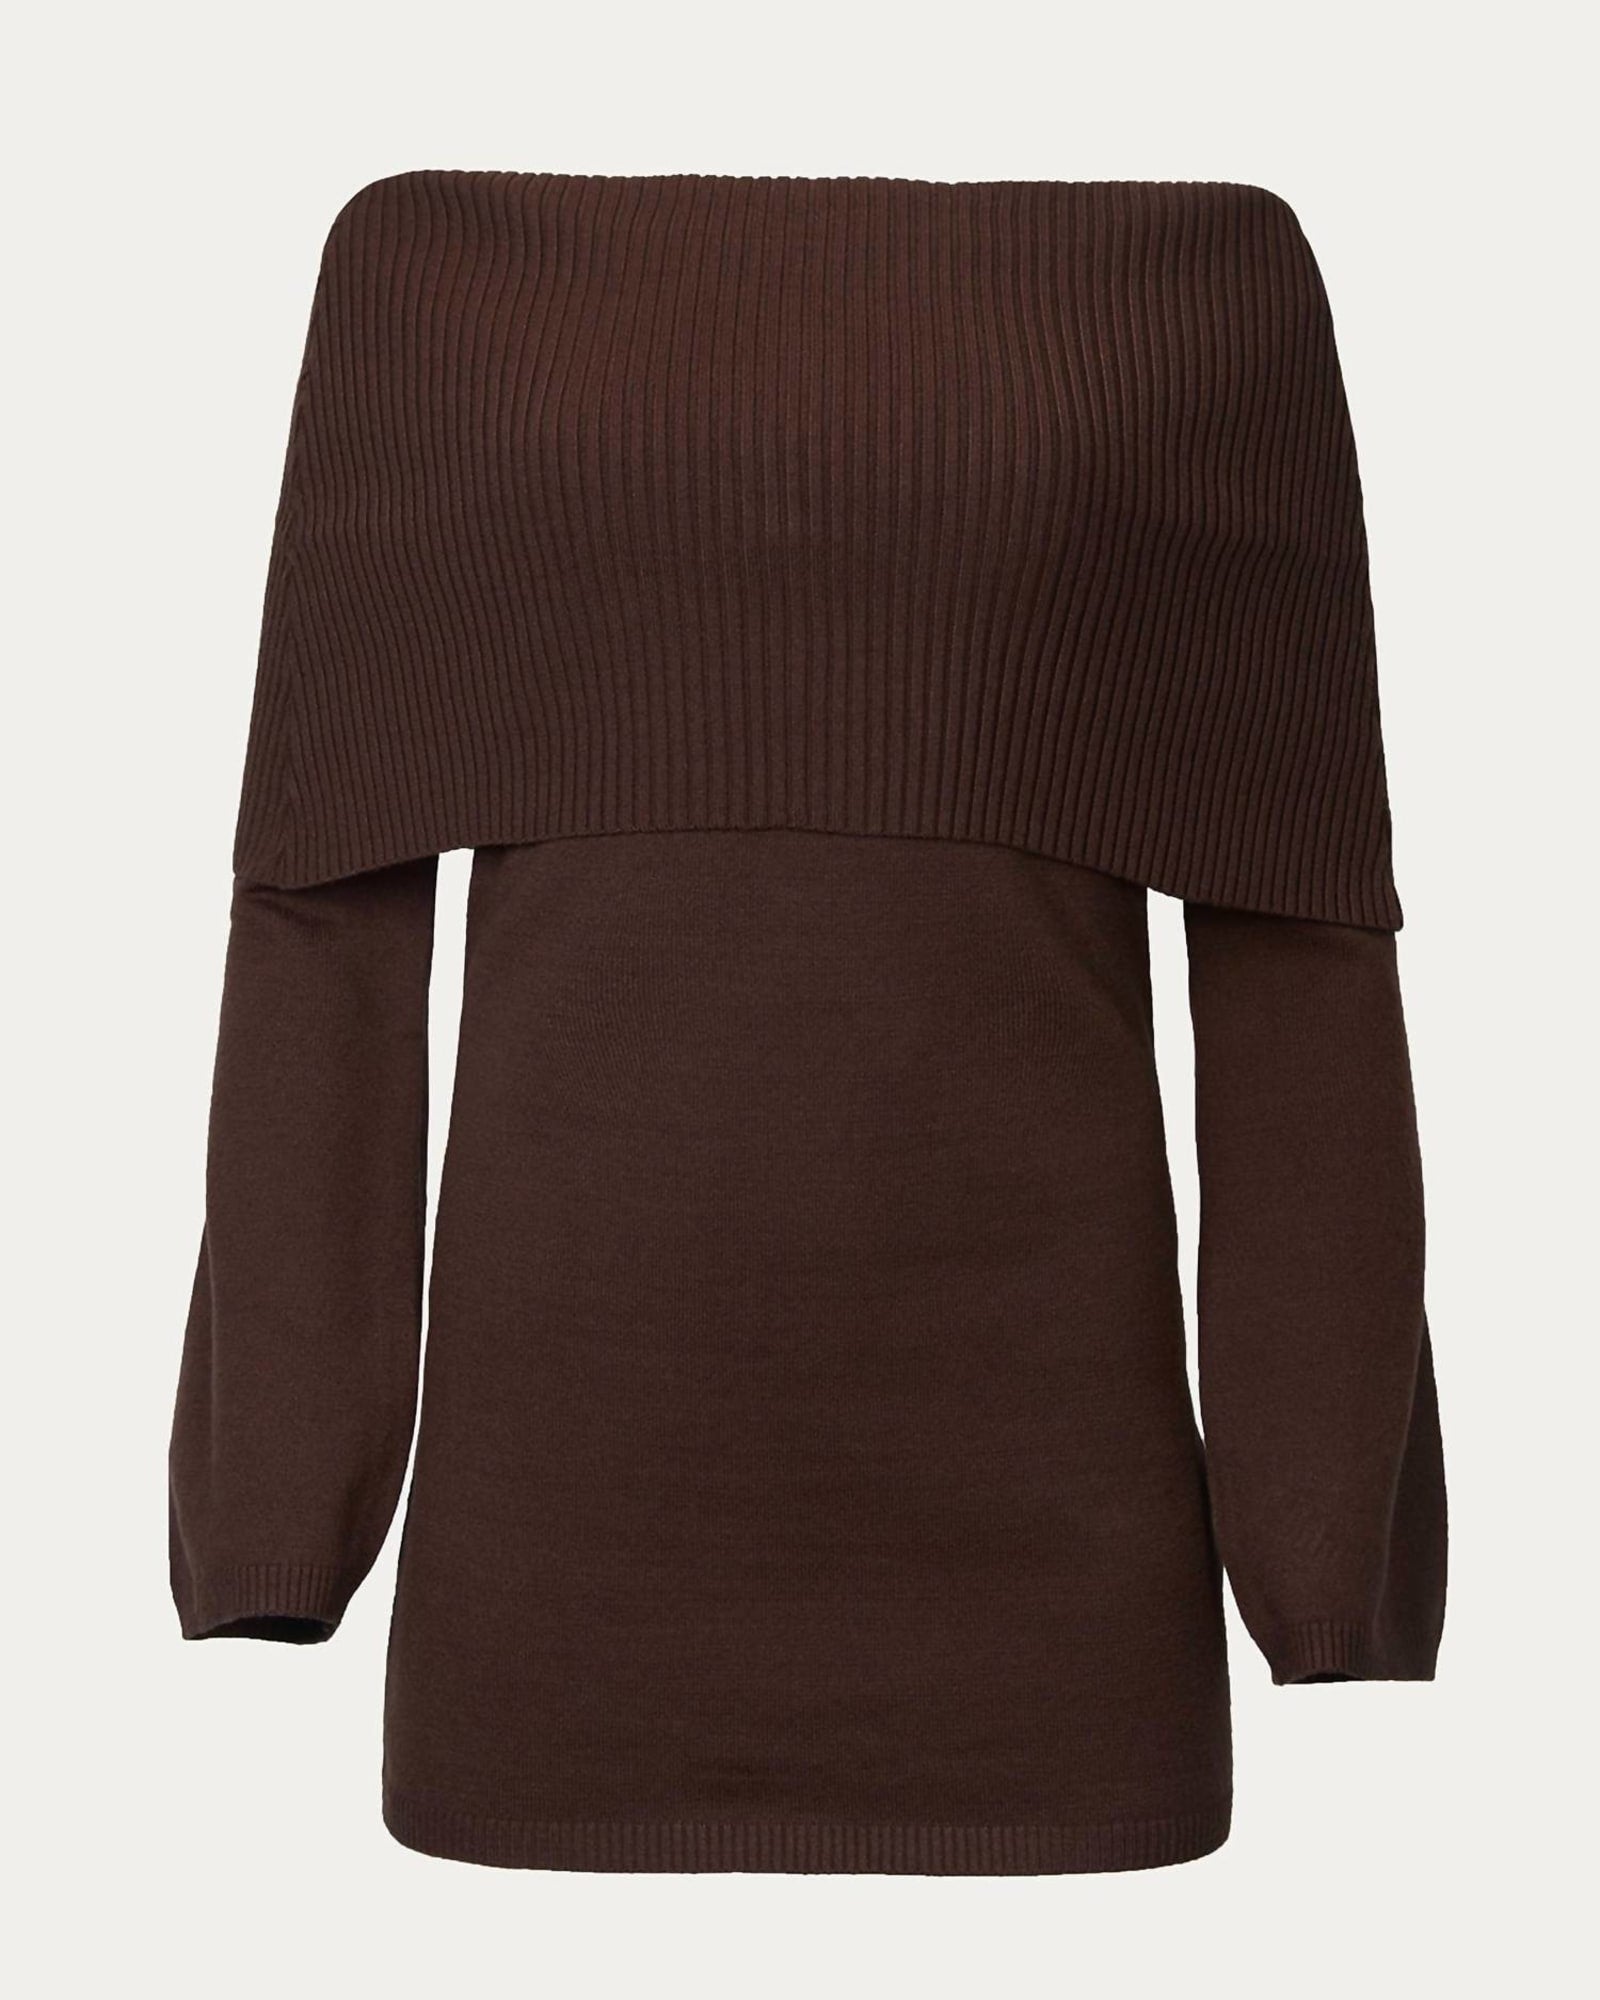 Off-The-Shoulder Sweater Dress in Chocolate | Chocolate